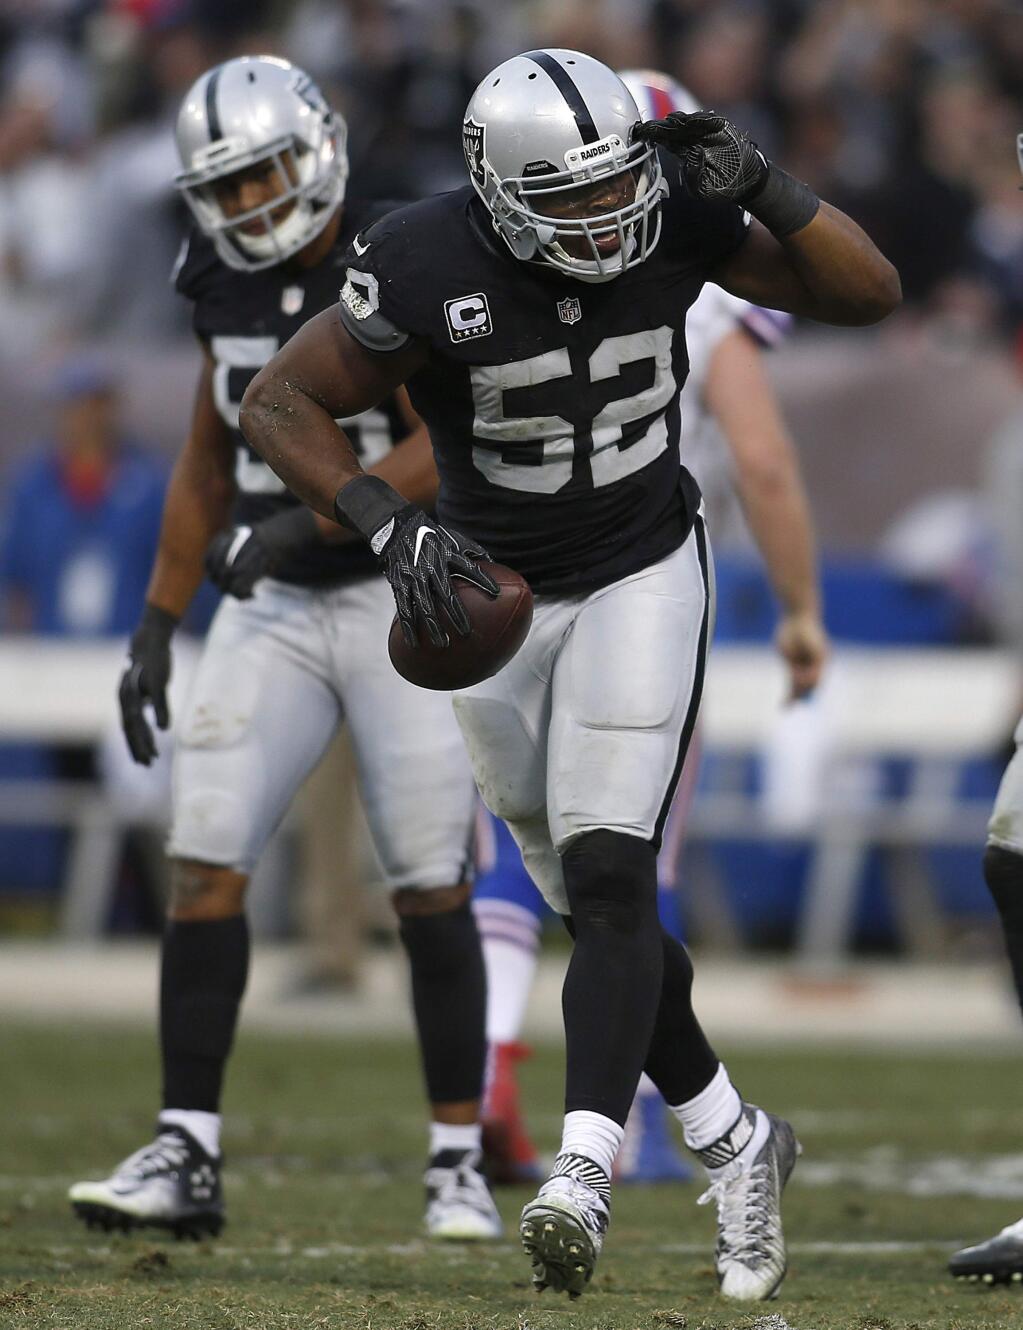 Oakland Raiders defensive end Khalil Mack (52) celebrates after recovering a fumble during the second half of an NFL football game against the Buffalo Bills in Oakland, Calif., Sunday, Dec. 4, 2016. The Raiders won 38-24. (AP Photo/D. Ross Cameron)